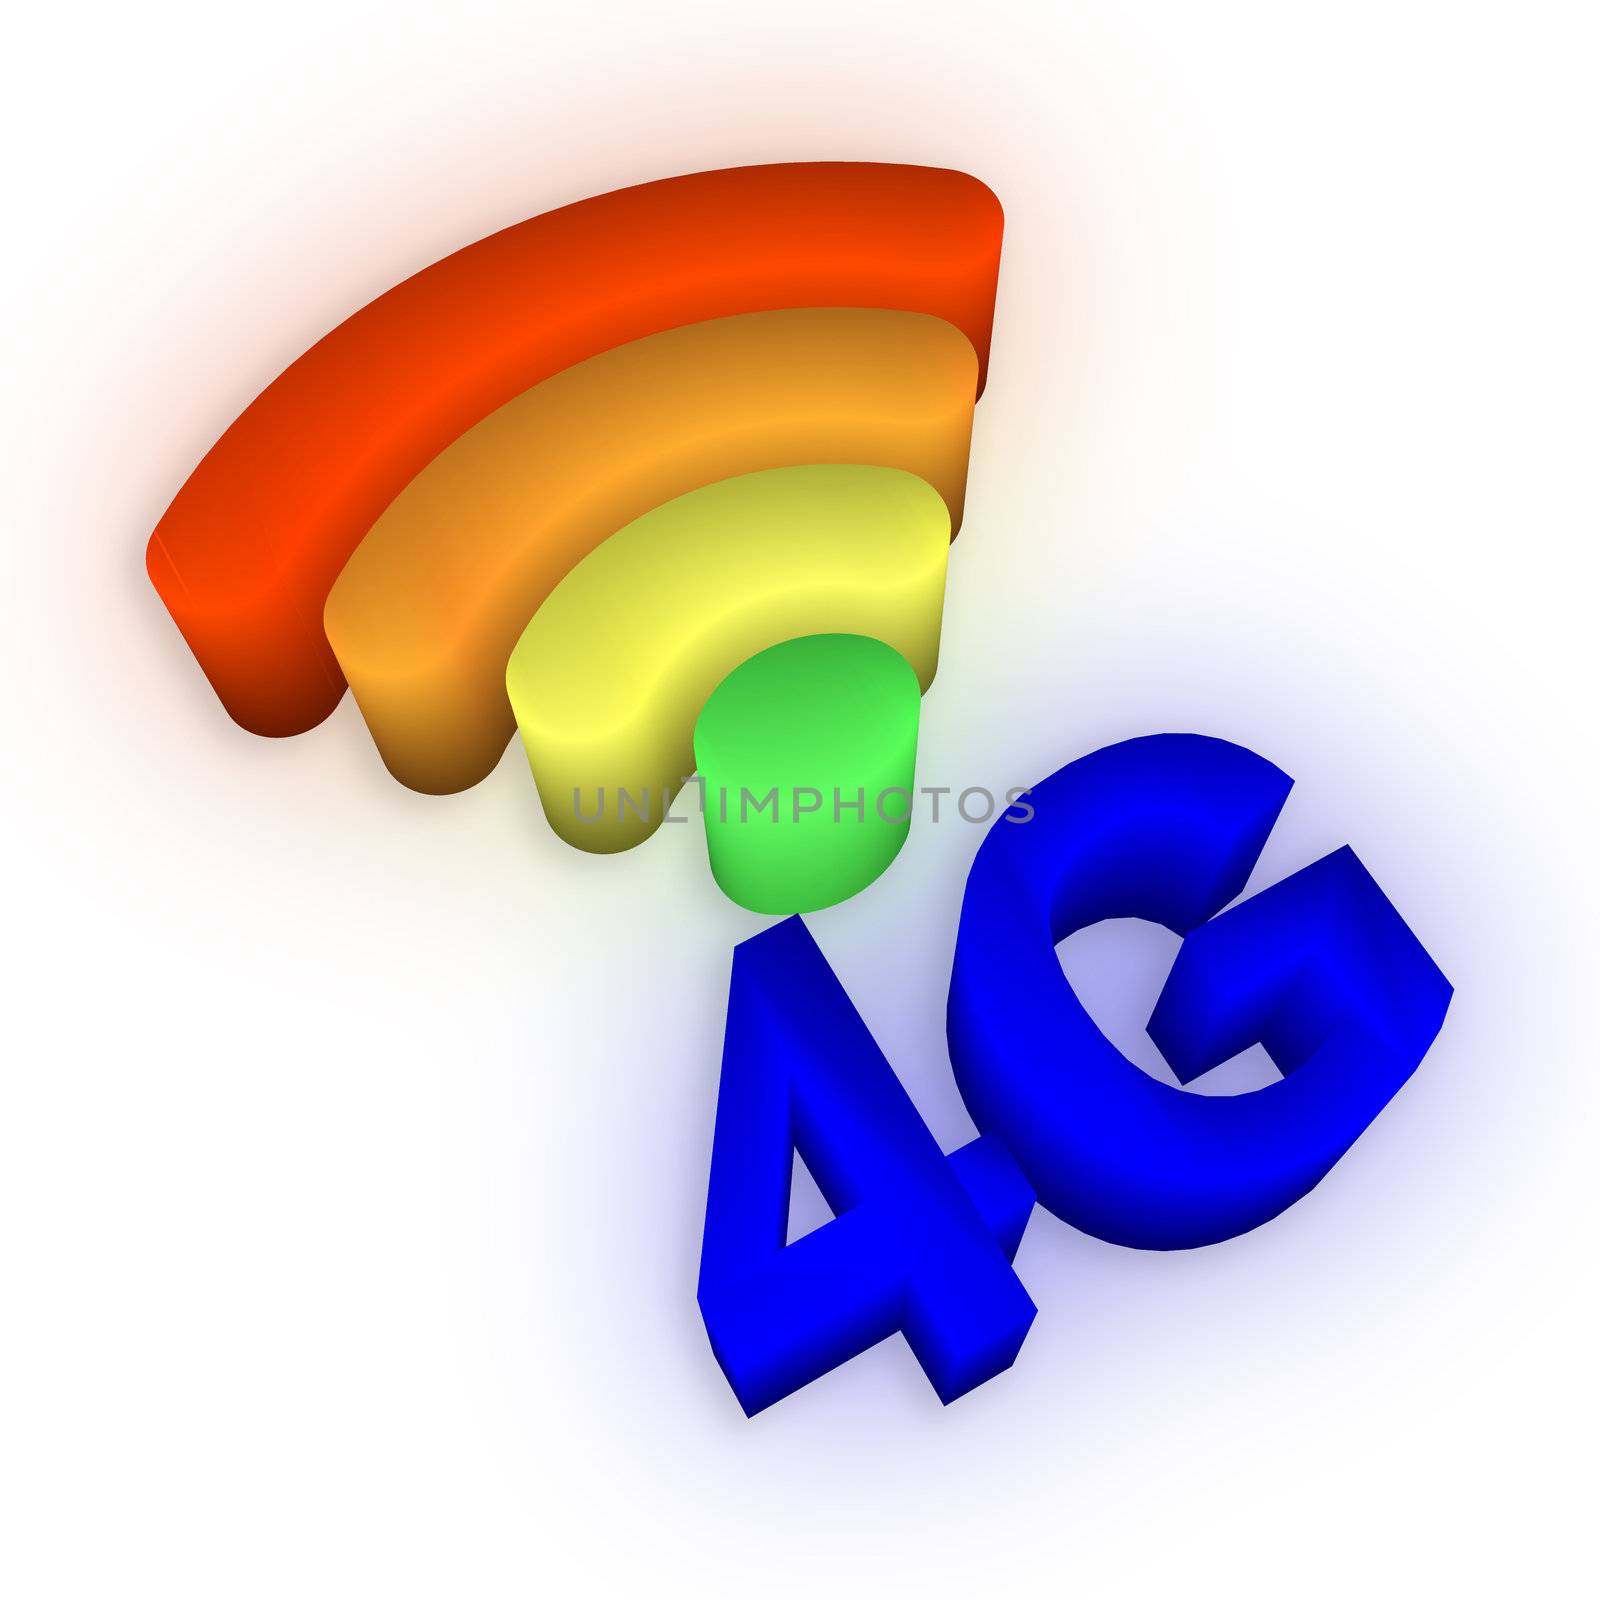 4G and signal symbol on white background